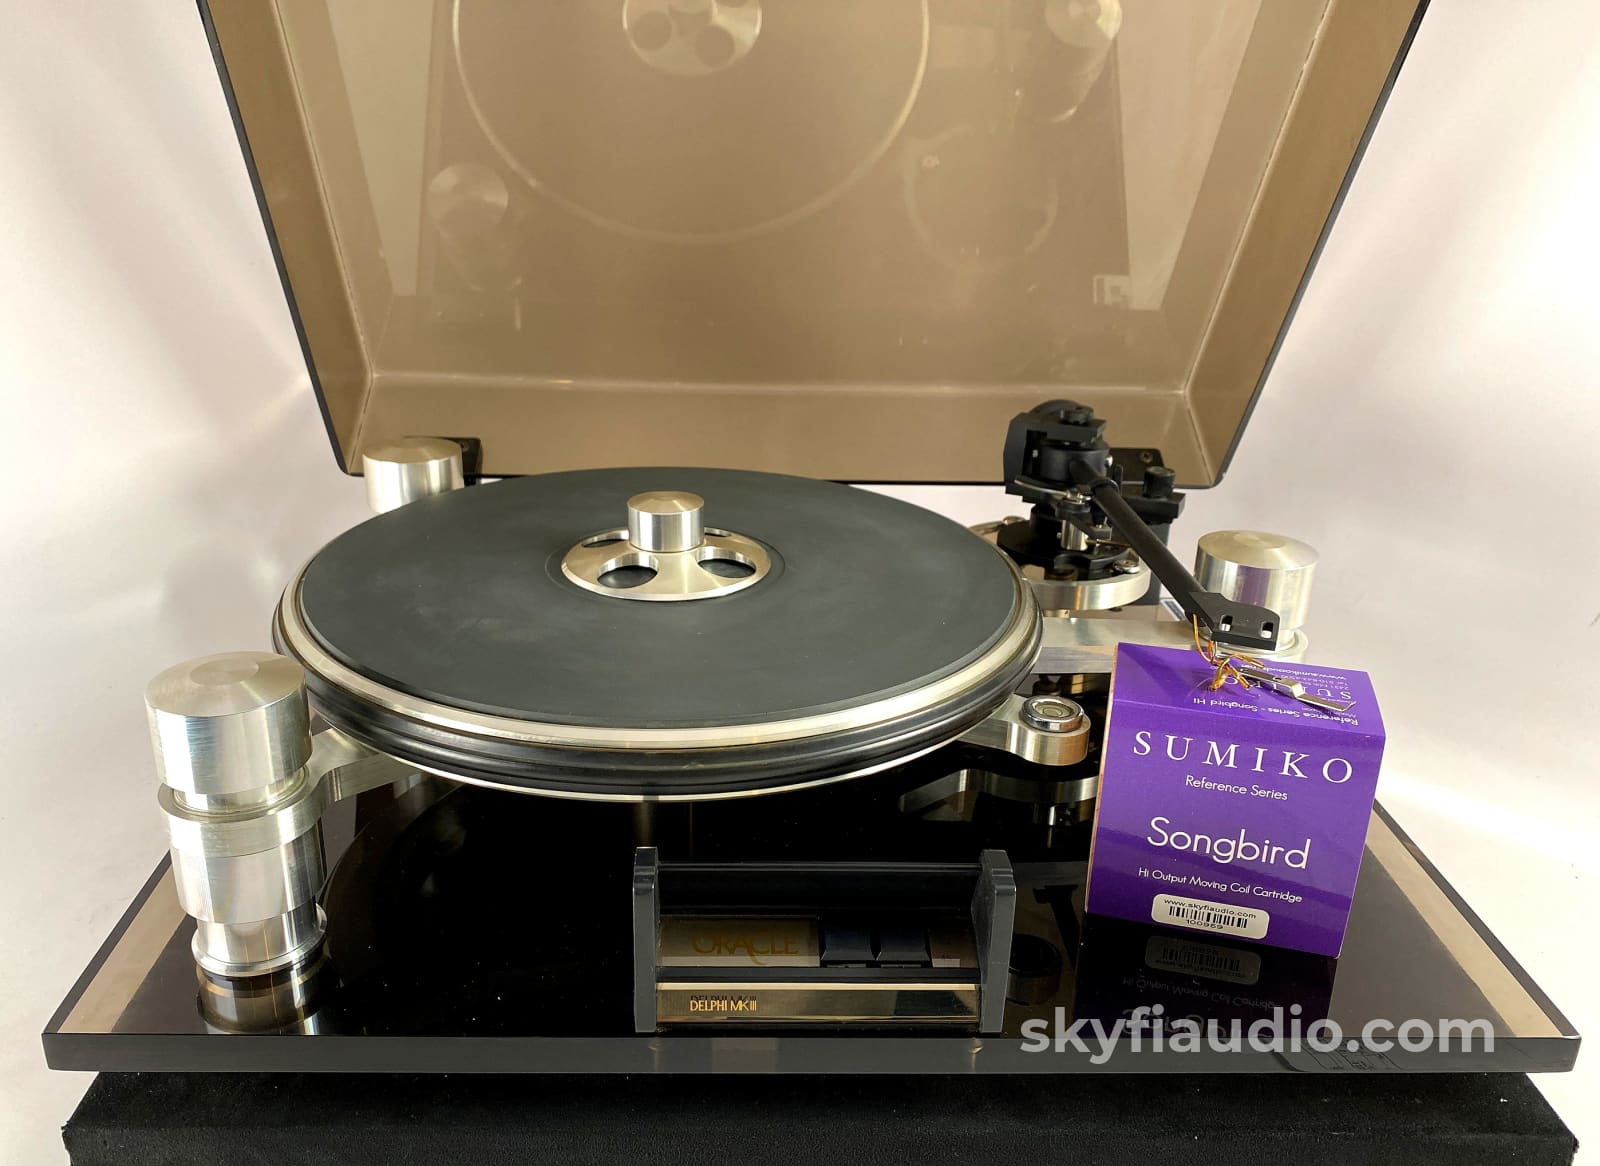 Oracle Delphi Mkiii Turntable With Sumiko Premier Ft-3 Arm And New Cartridge